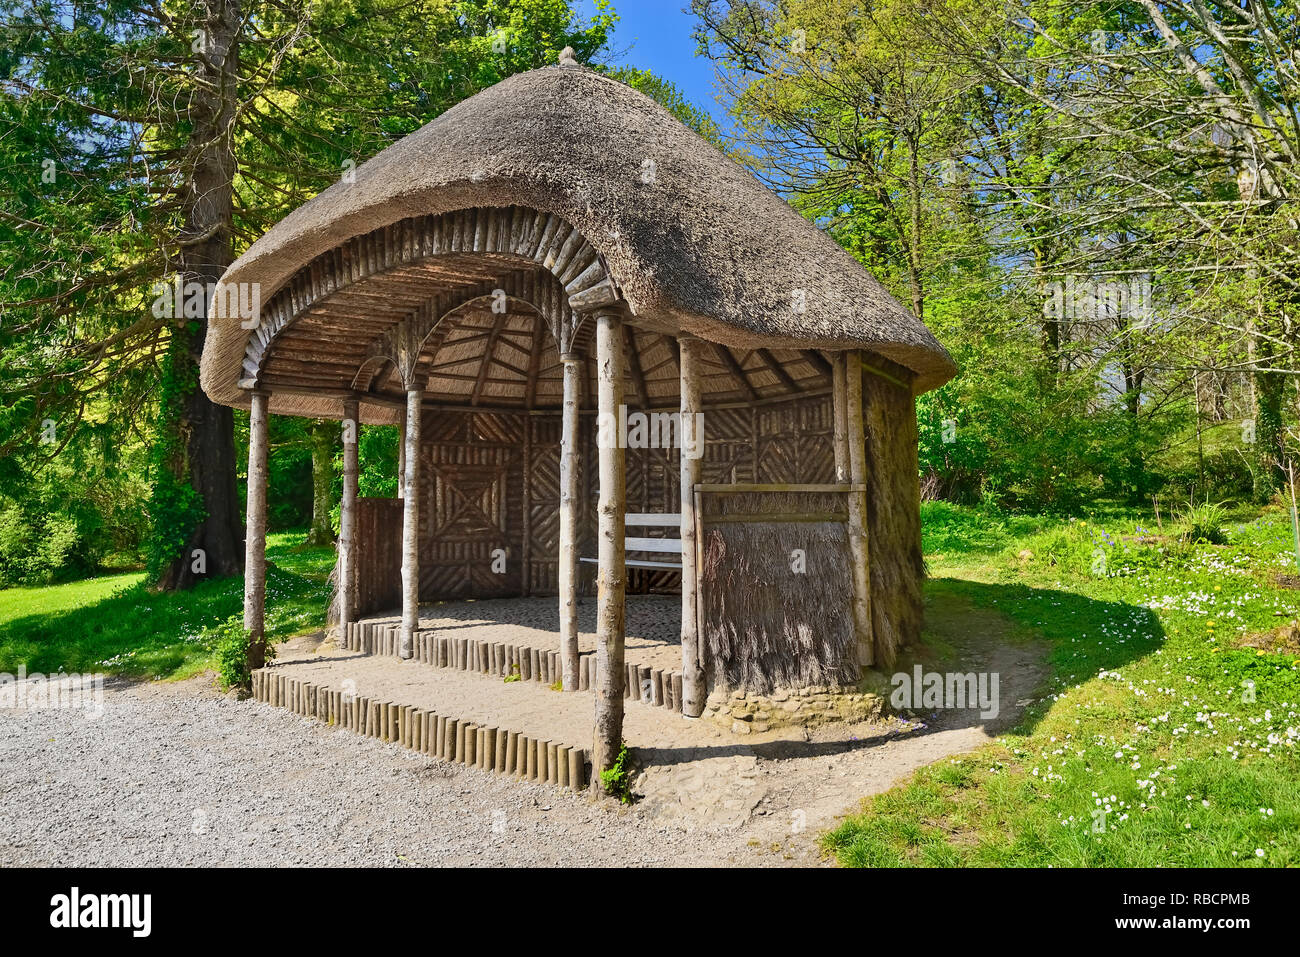 Northern Ireland, County Fermanagh, Florence Court Gardens, The Summer House. Stock Photo